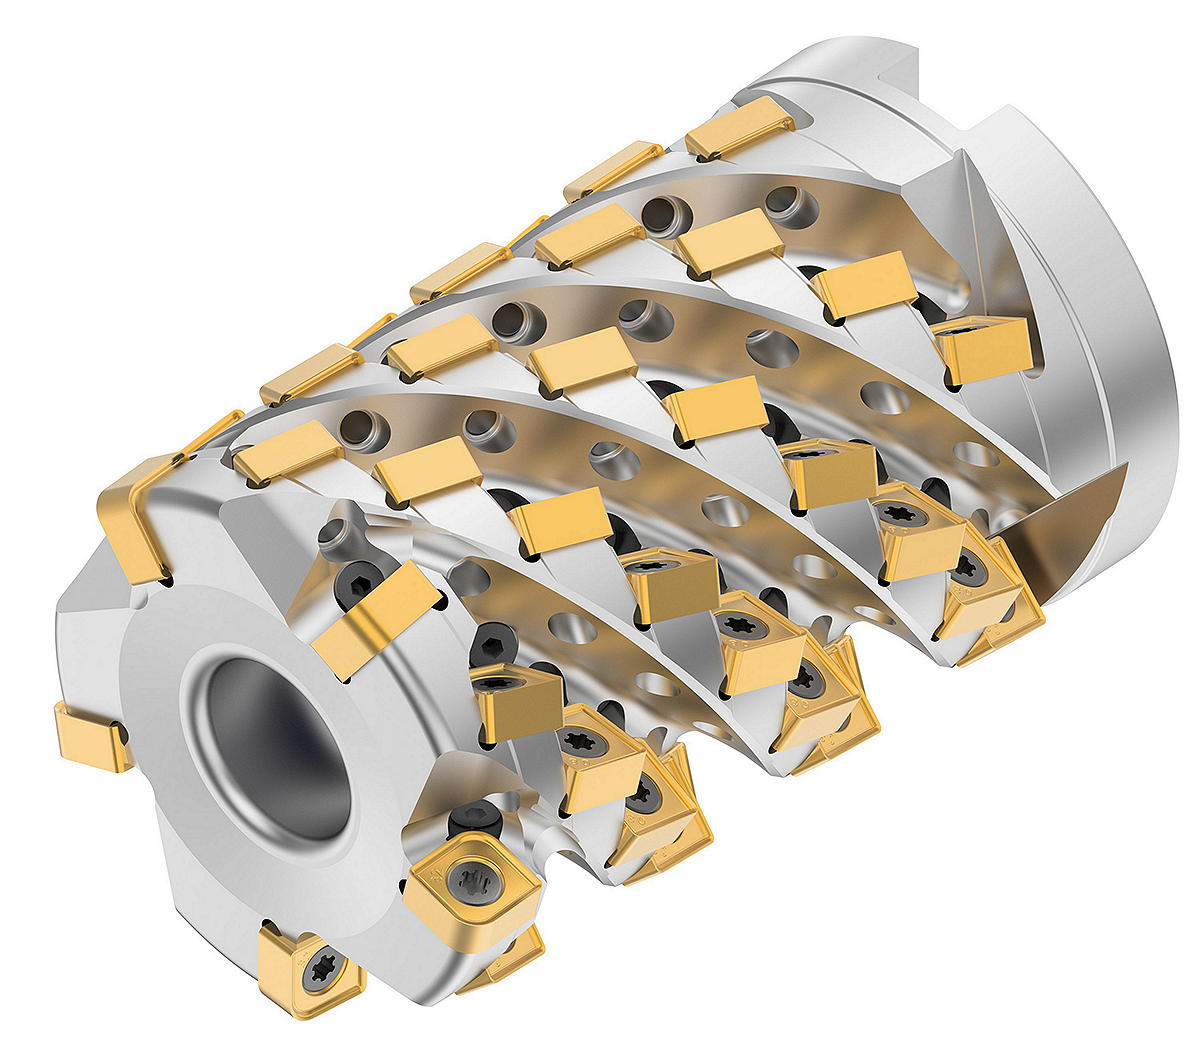 Shoulder milling cutter for steel, stainless steel, and high-temperature alloys.